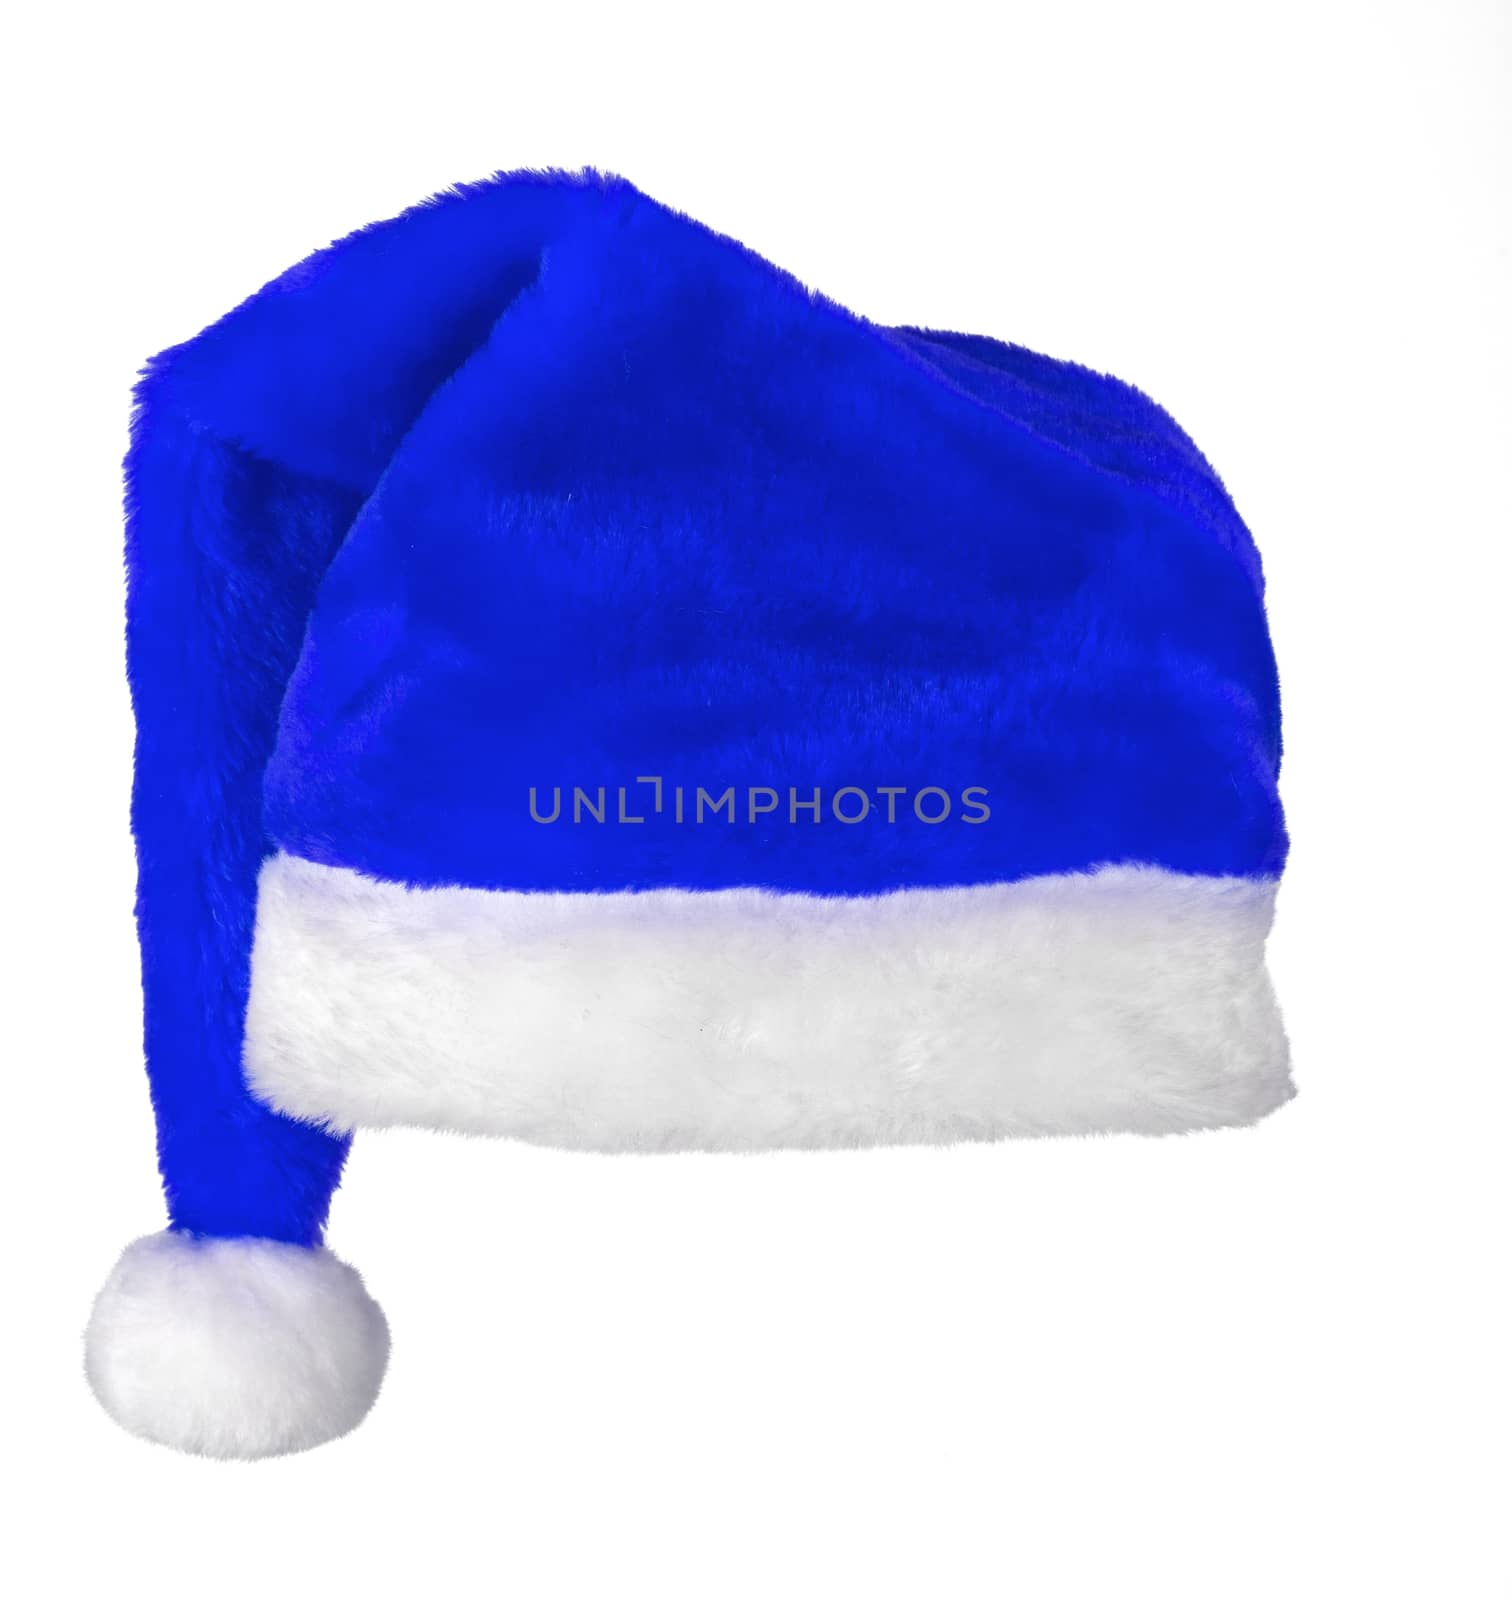 Santa claus blue hat on white background by ozaiachin